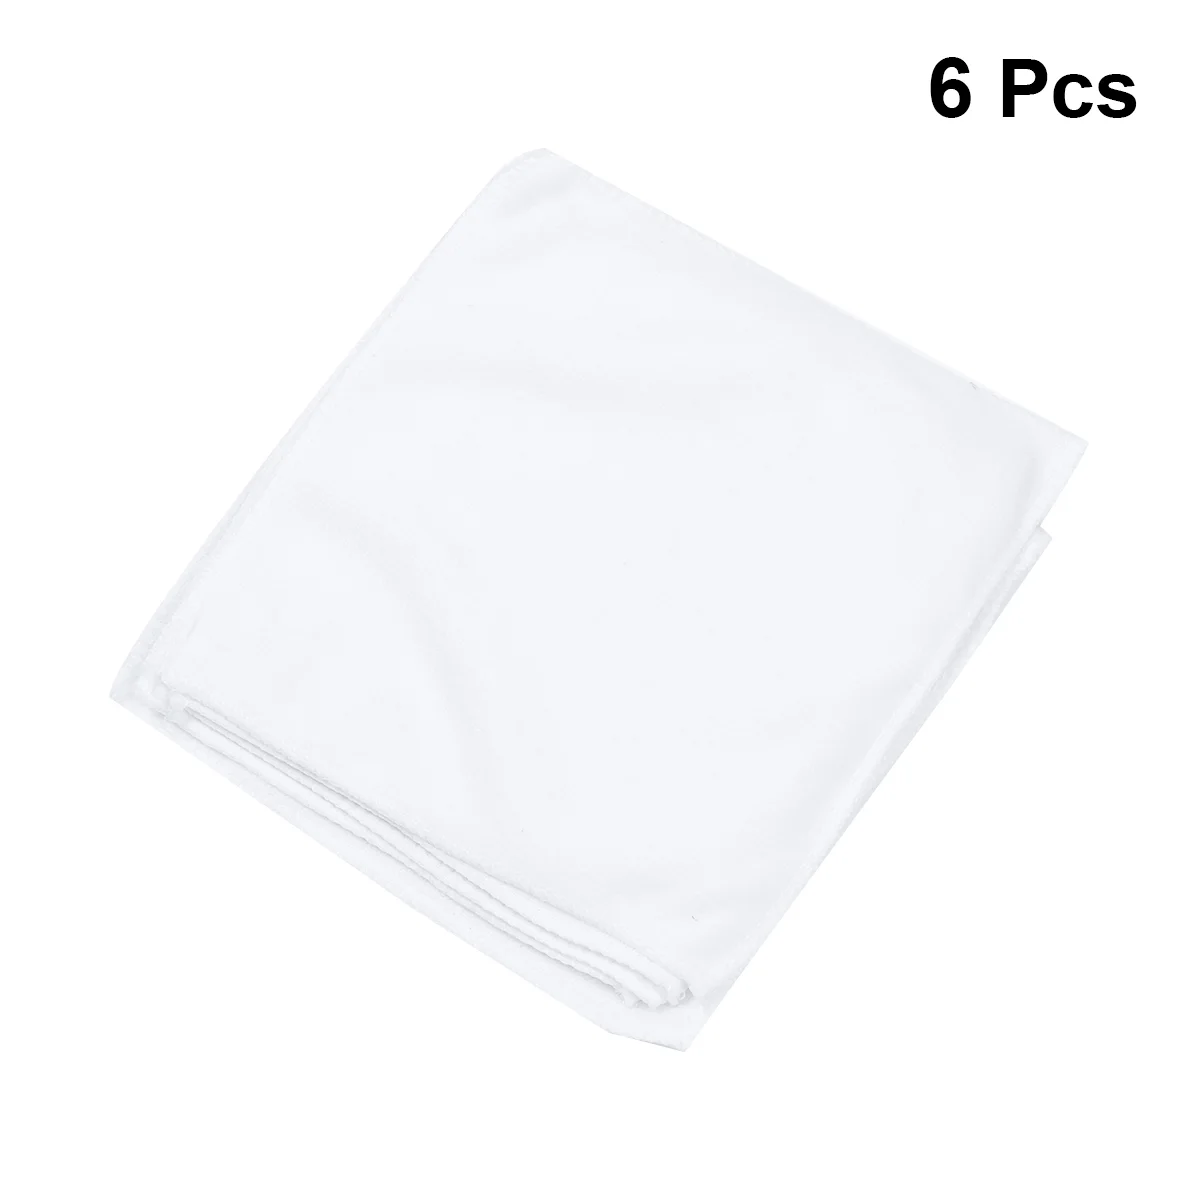 

6pcs Microfiber Towels White Bath Towels Water Absorption Beauty Towels for Home Hotels Beauty SPA